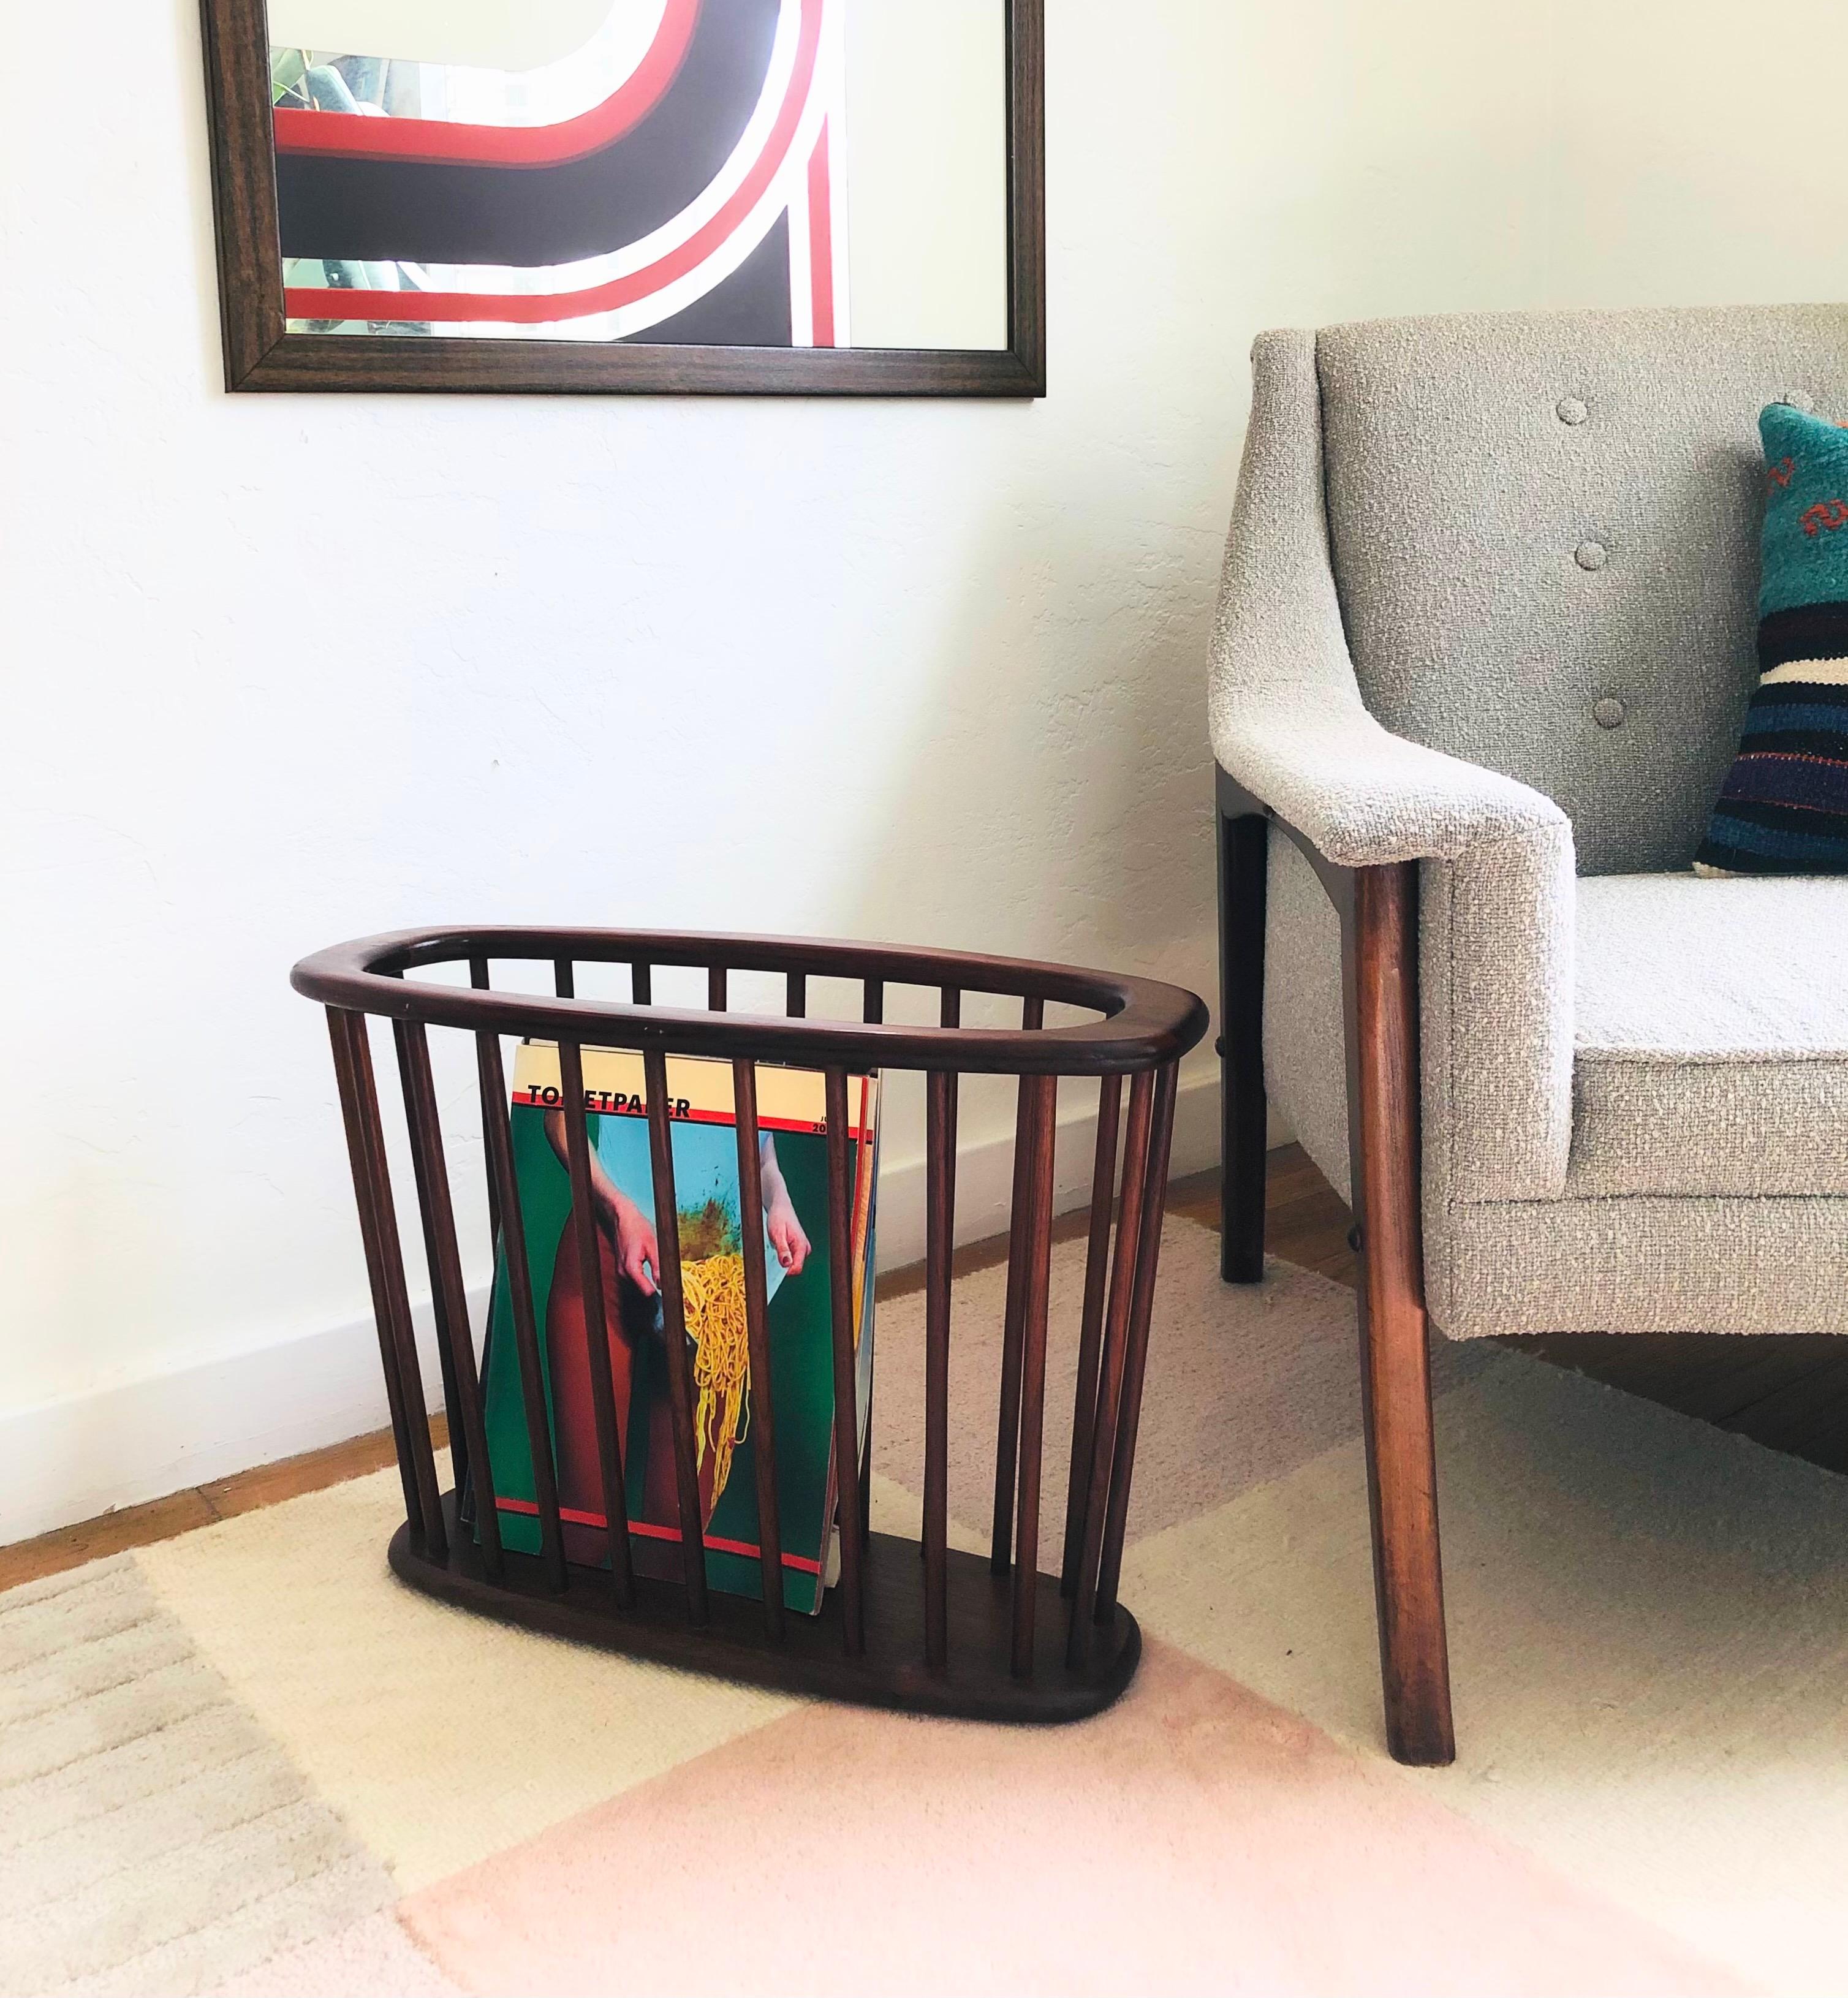 A mid century walnut magazine rack designed by Arthur Umanoff. Oval with vertical spindles around the sides. Elegant tapered shape. A wonderful mid century minimalist design and functional storage piece.

